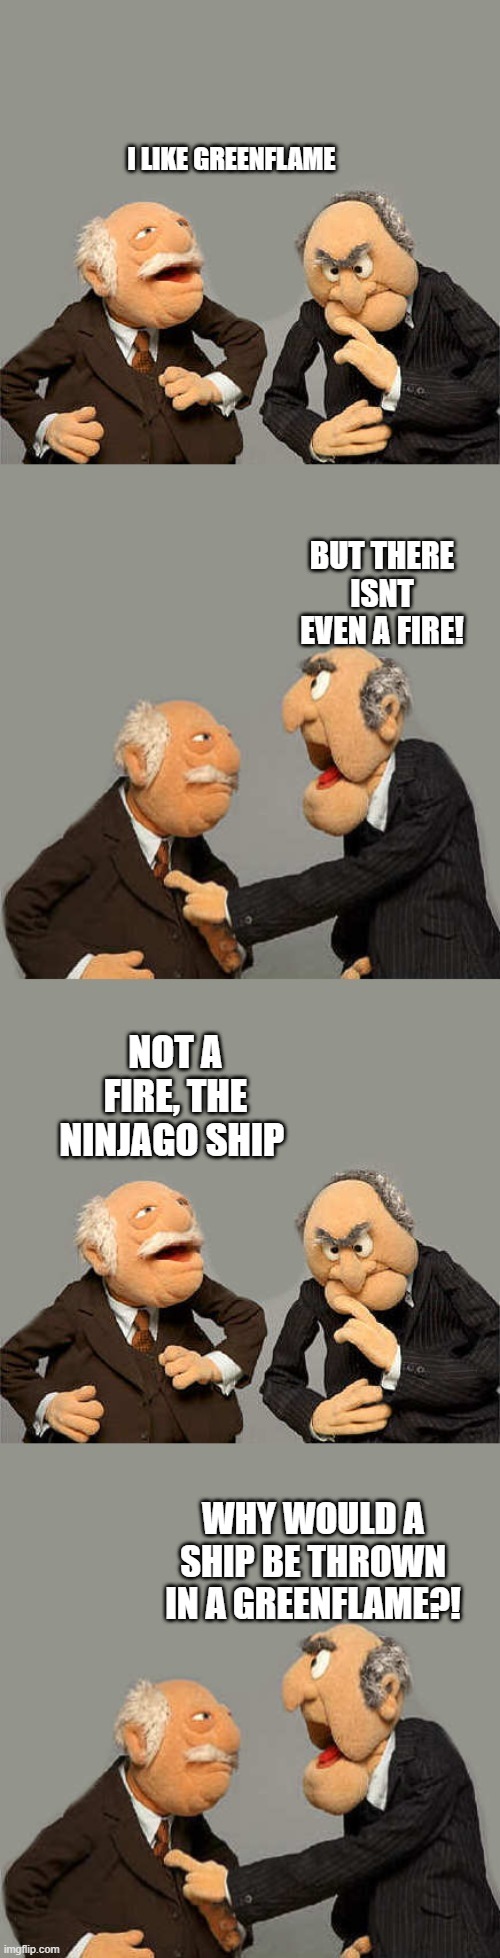 please dont hate me for shipping greenflame. we all have opinions, okay? | I LIKE GREENFLAME; BUT THERE ISNT EVEN A FIRE! NOT A FIRE, THE NINJAGO SHIP; WHY WOULD A SHIP BE THROWN IN A GREENFLAME?! | image tagged in meme without a name,greenflame ninjago | made w/ Imgflip meme maker